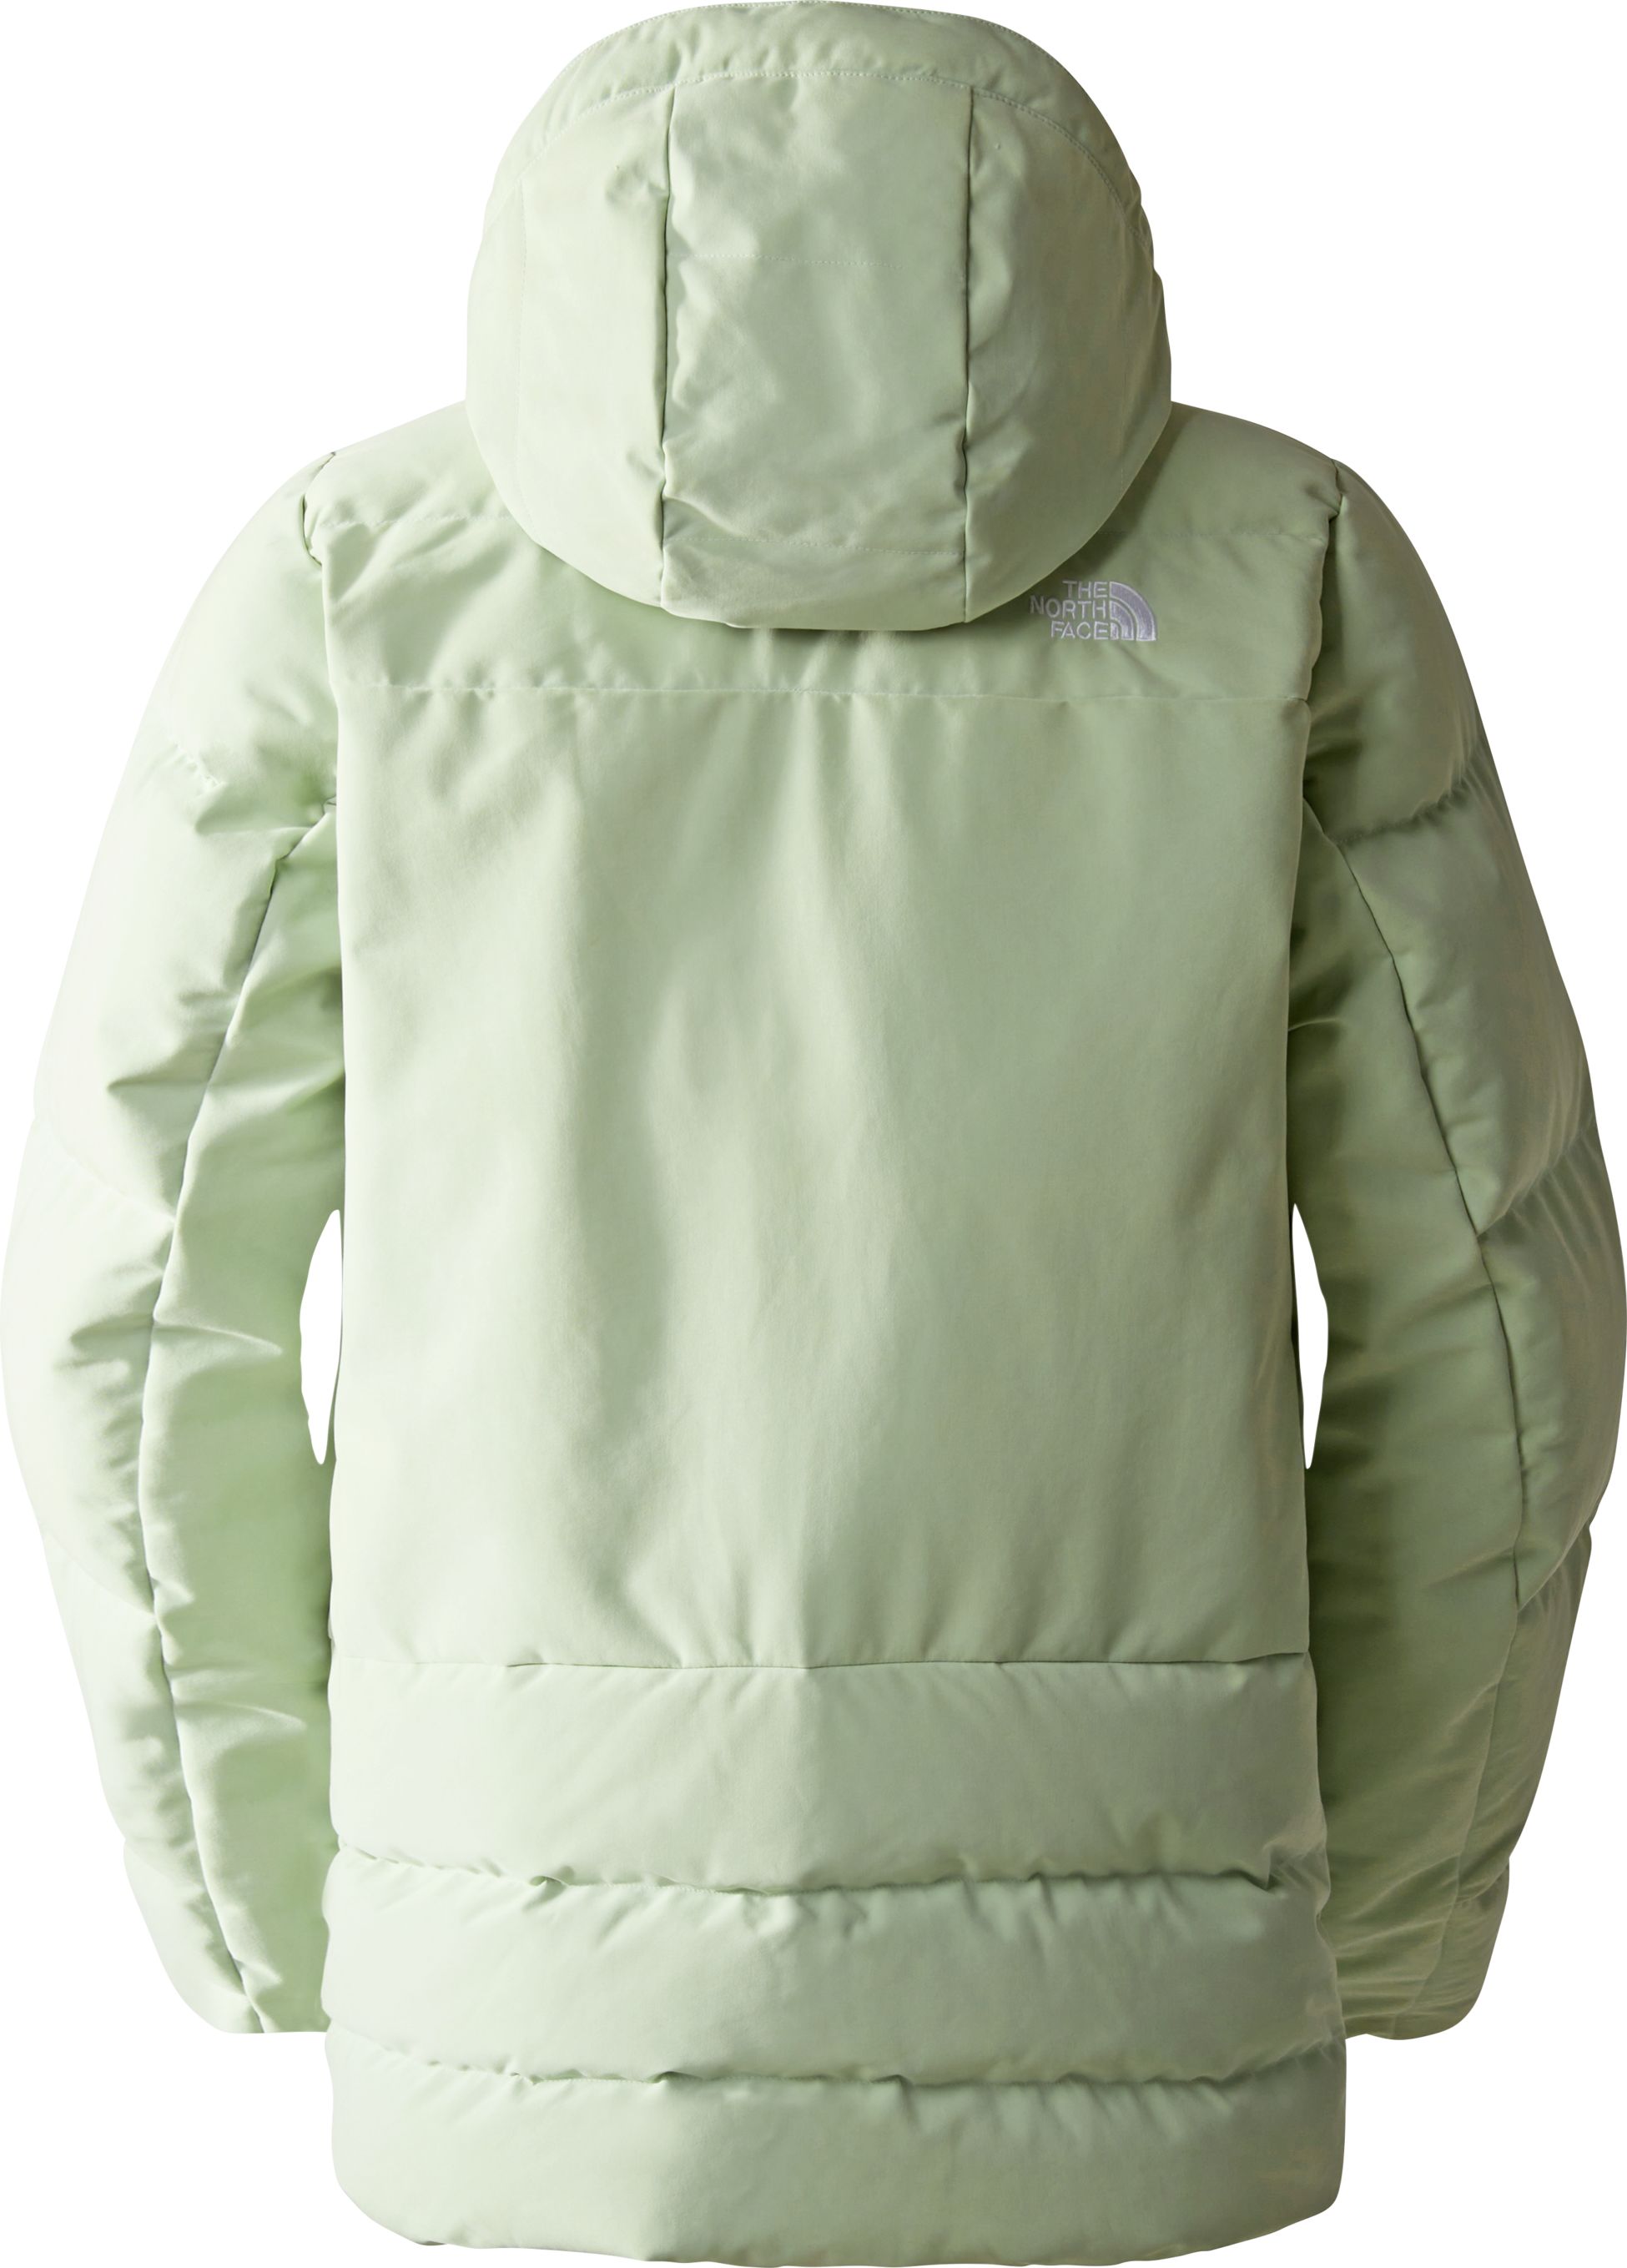 THE NORTH FACE, W PALLIE DOWN JKT